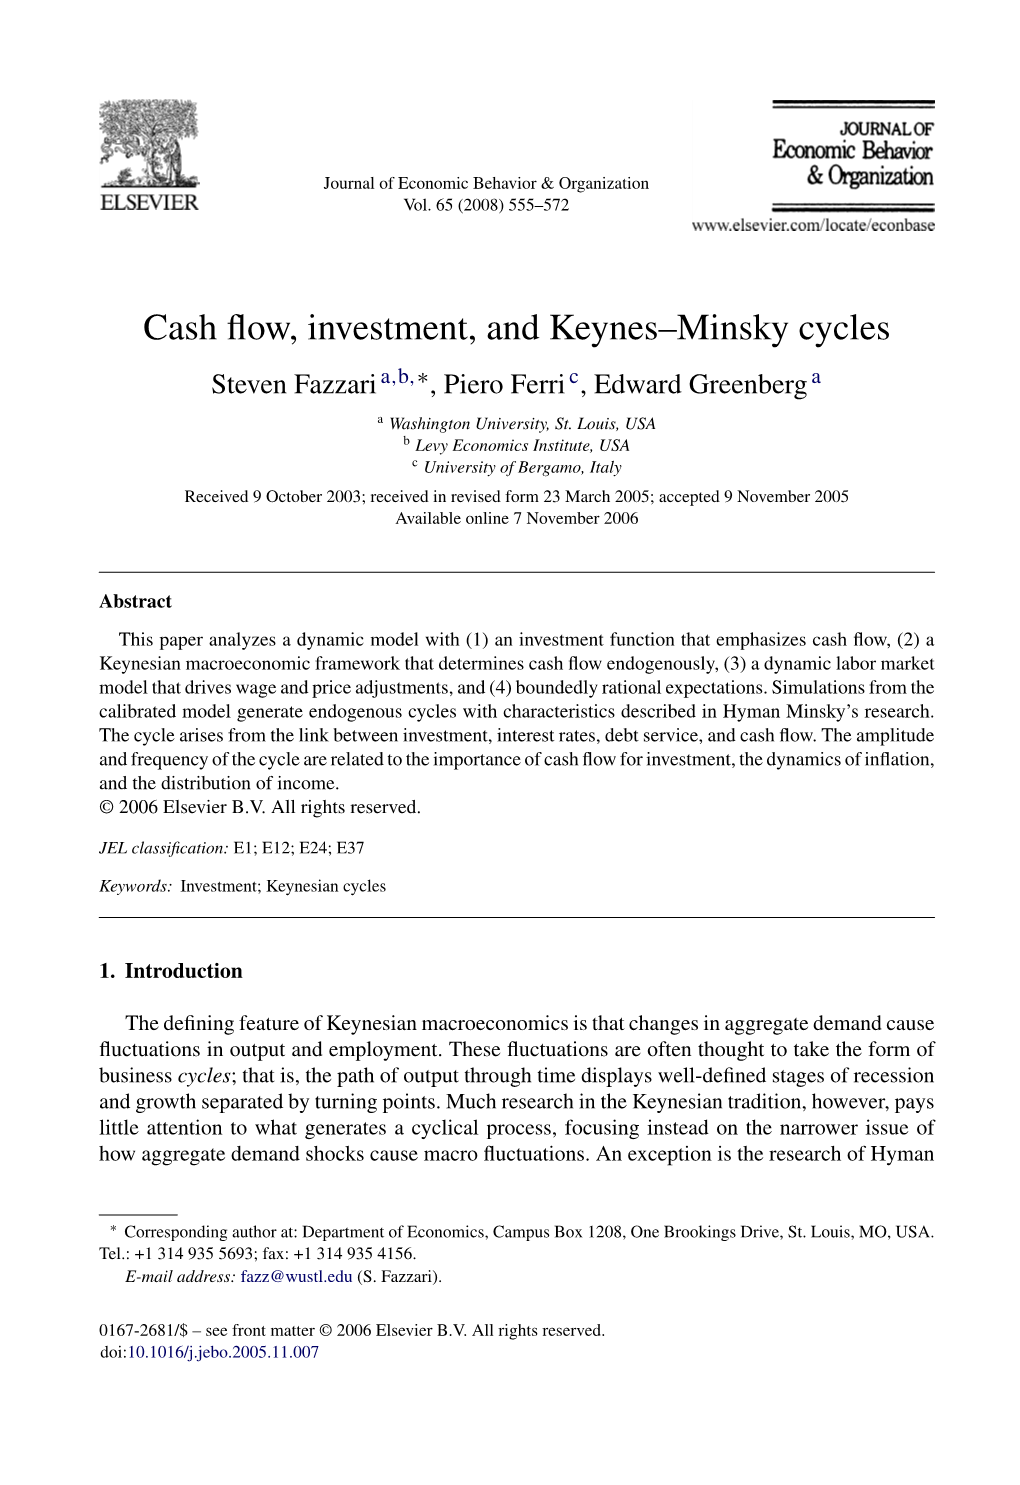 Cash Flow, Investment, and Keynes–Minsky Cycles